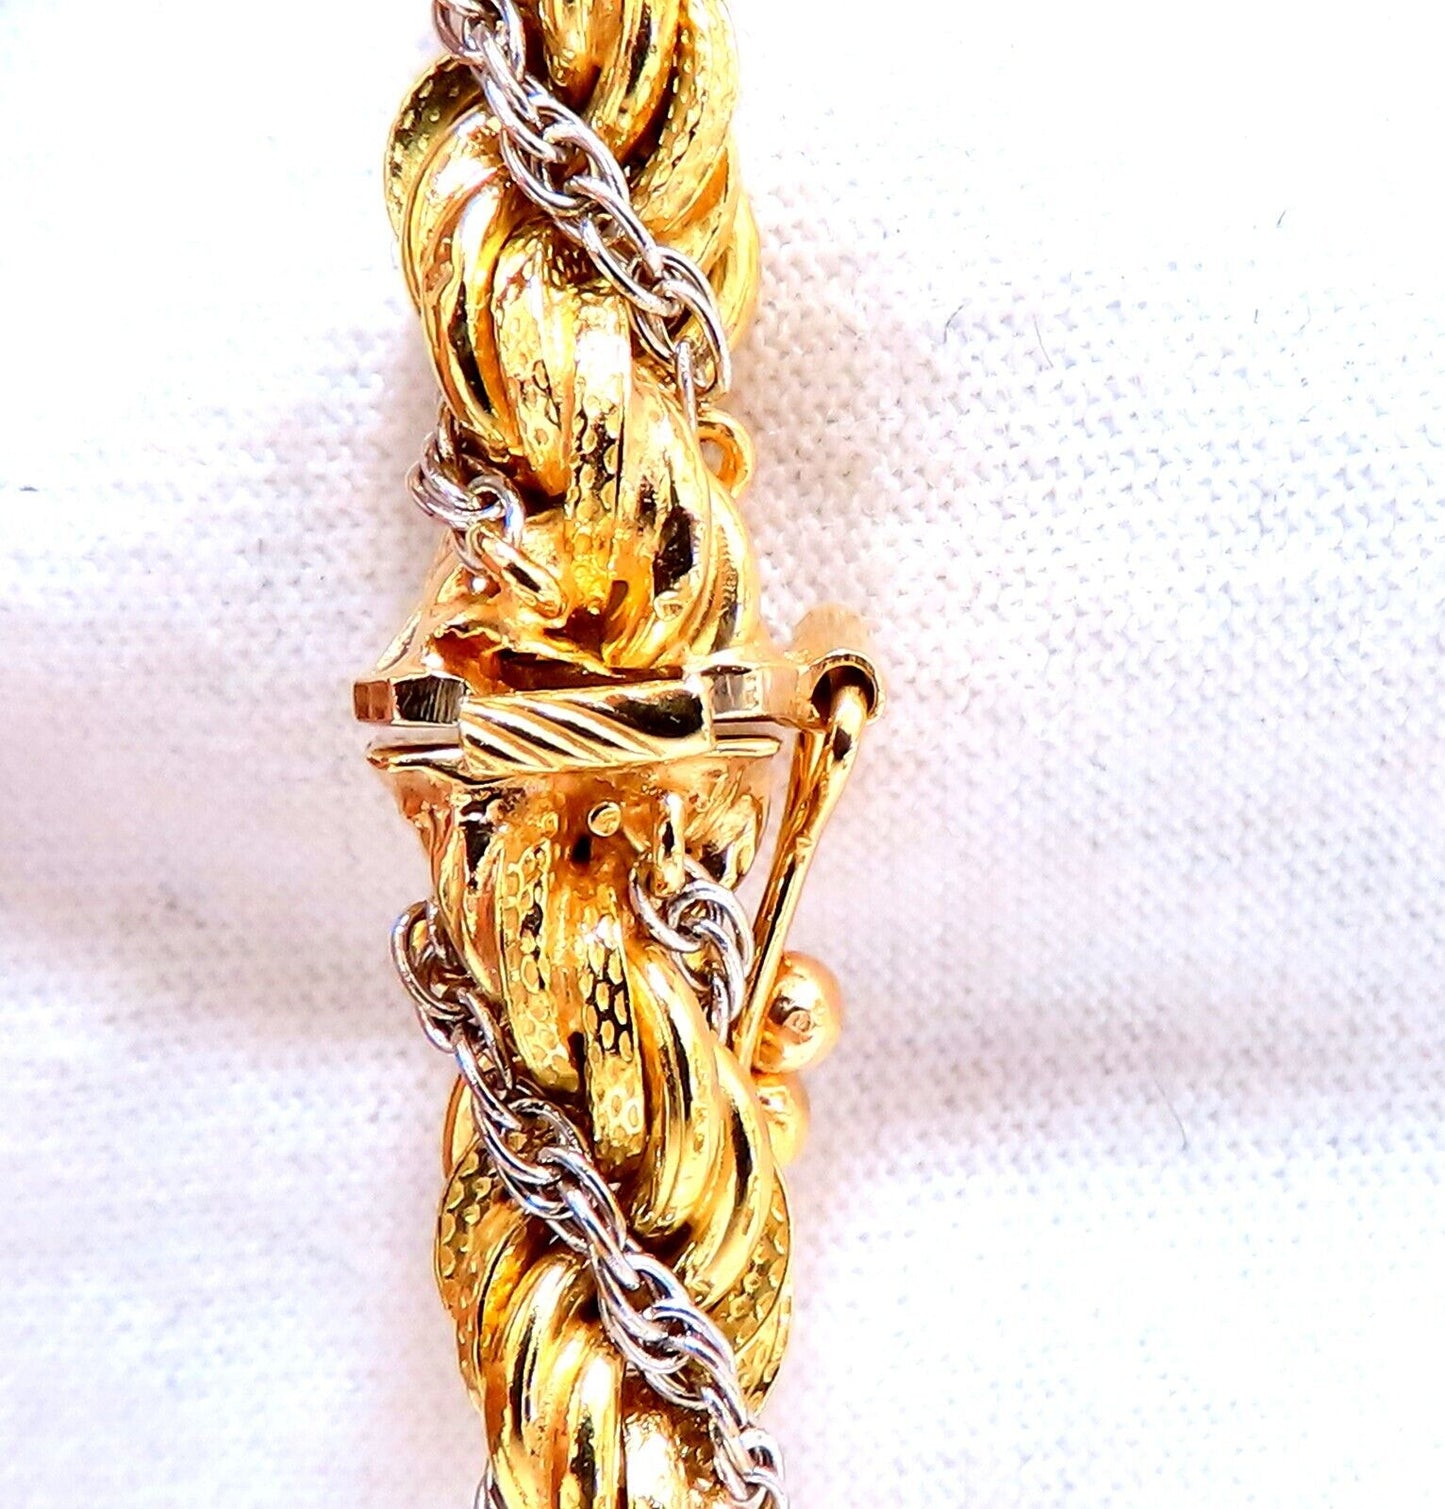 Rope Chain Necklace 14kt 63 Grams 30inch